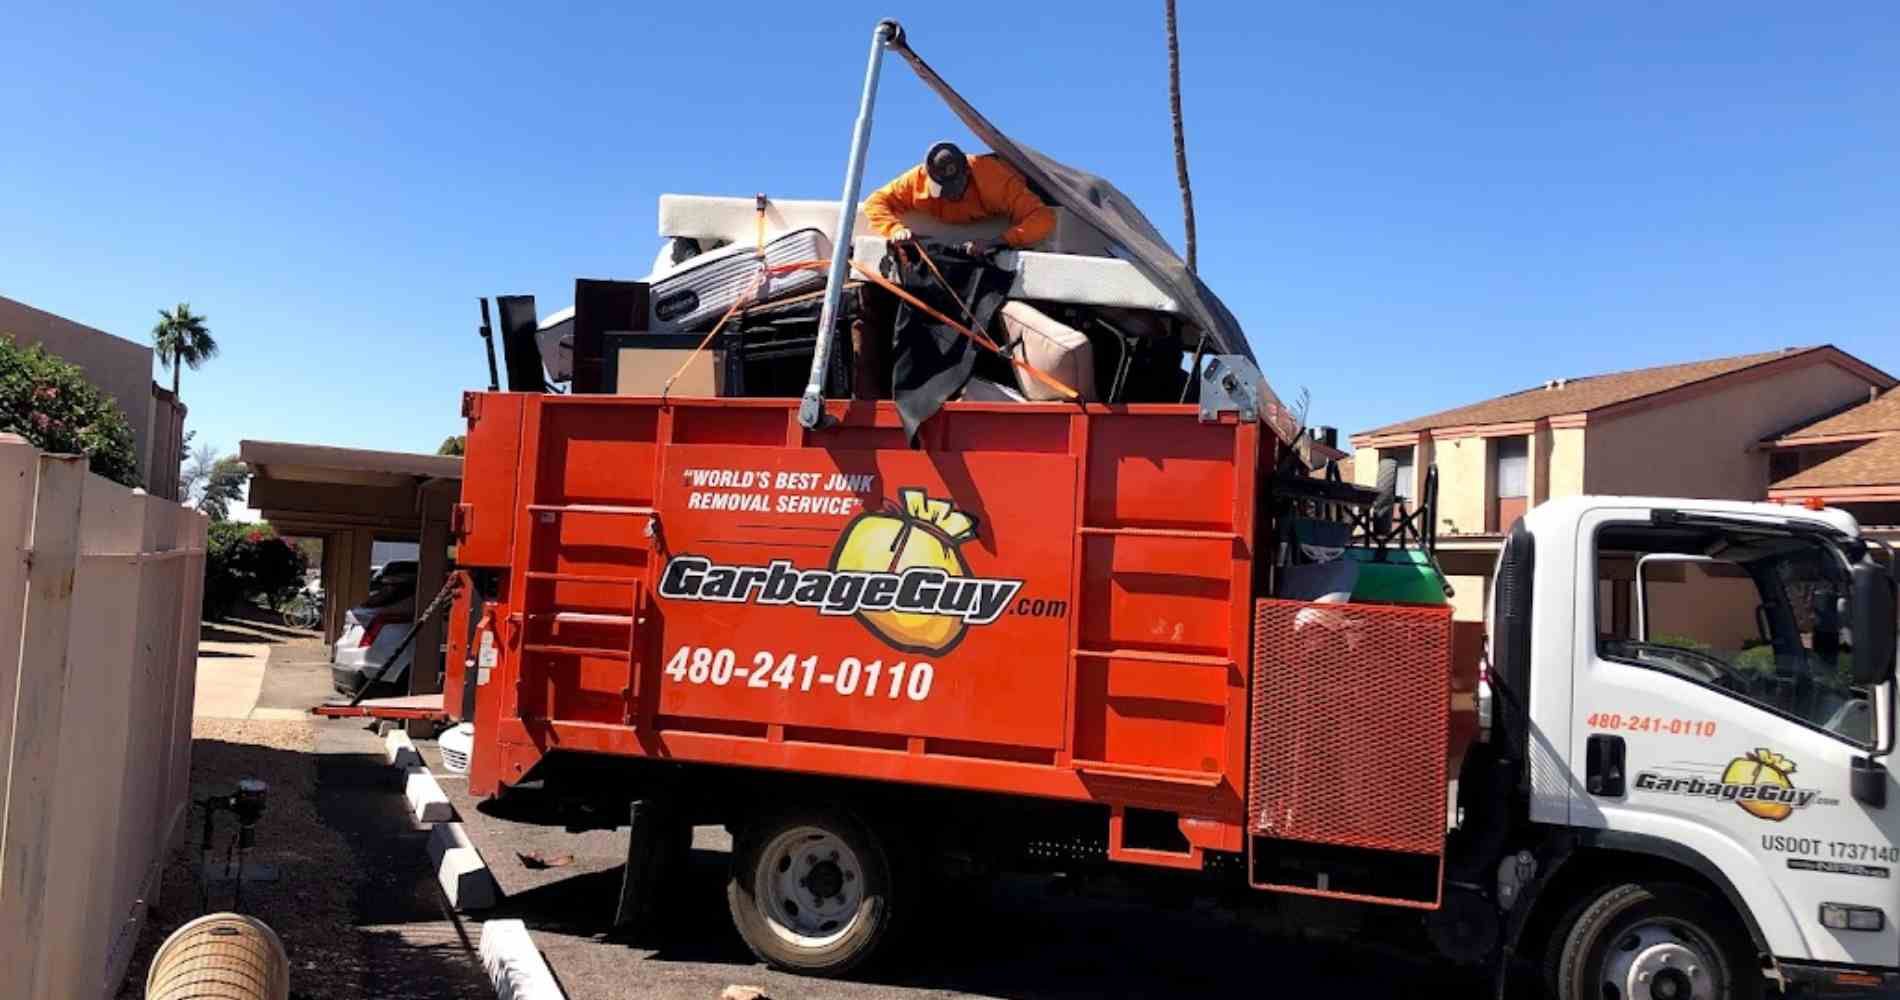 #1 for Furniture Removal in Phoenix, AZ With Over 1200 5-Star Reviews!